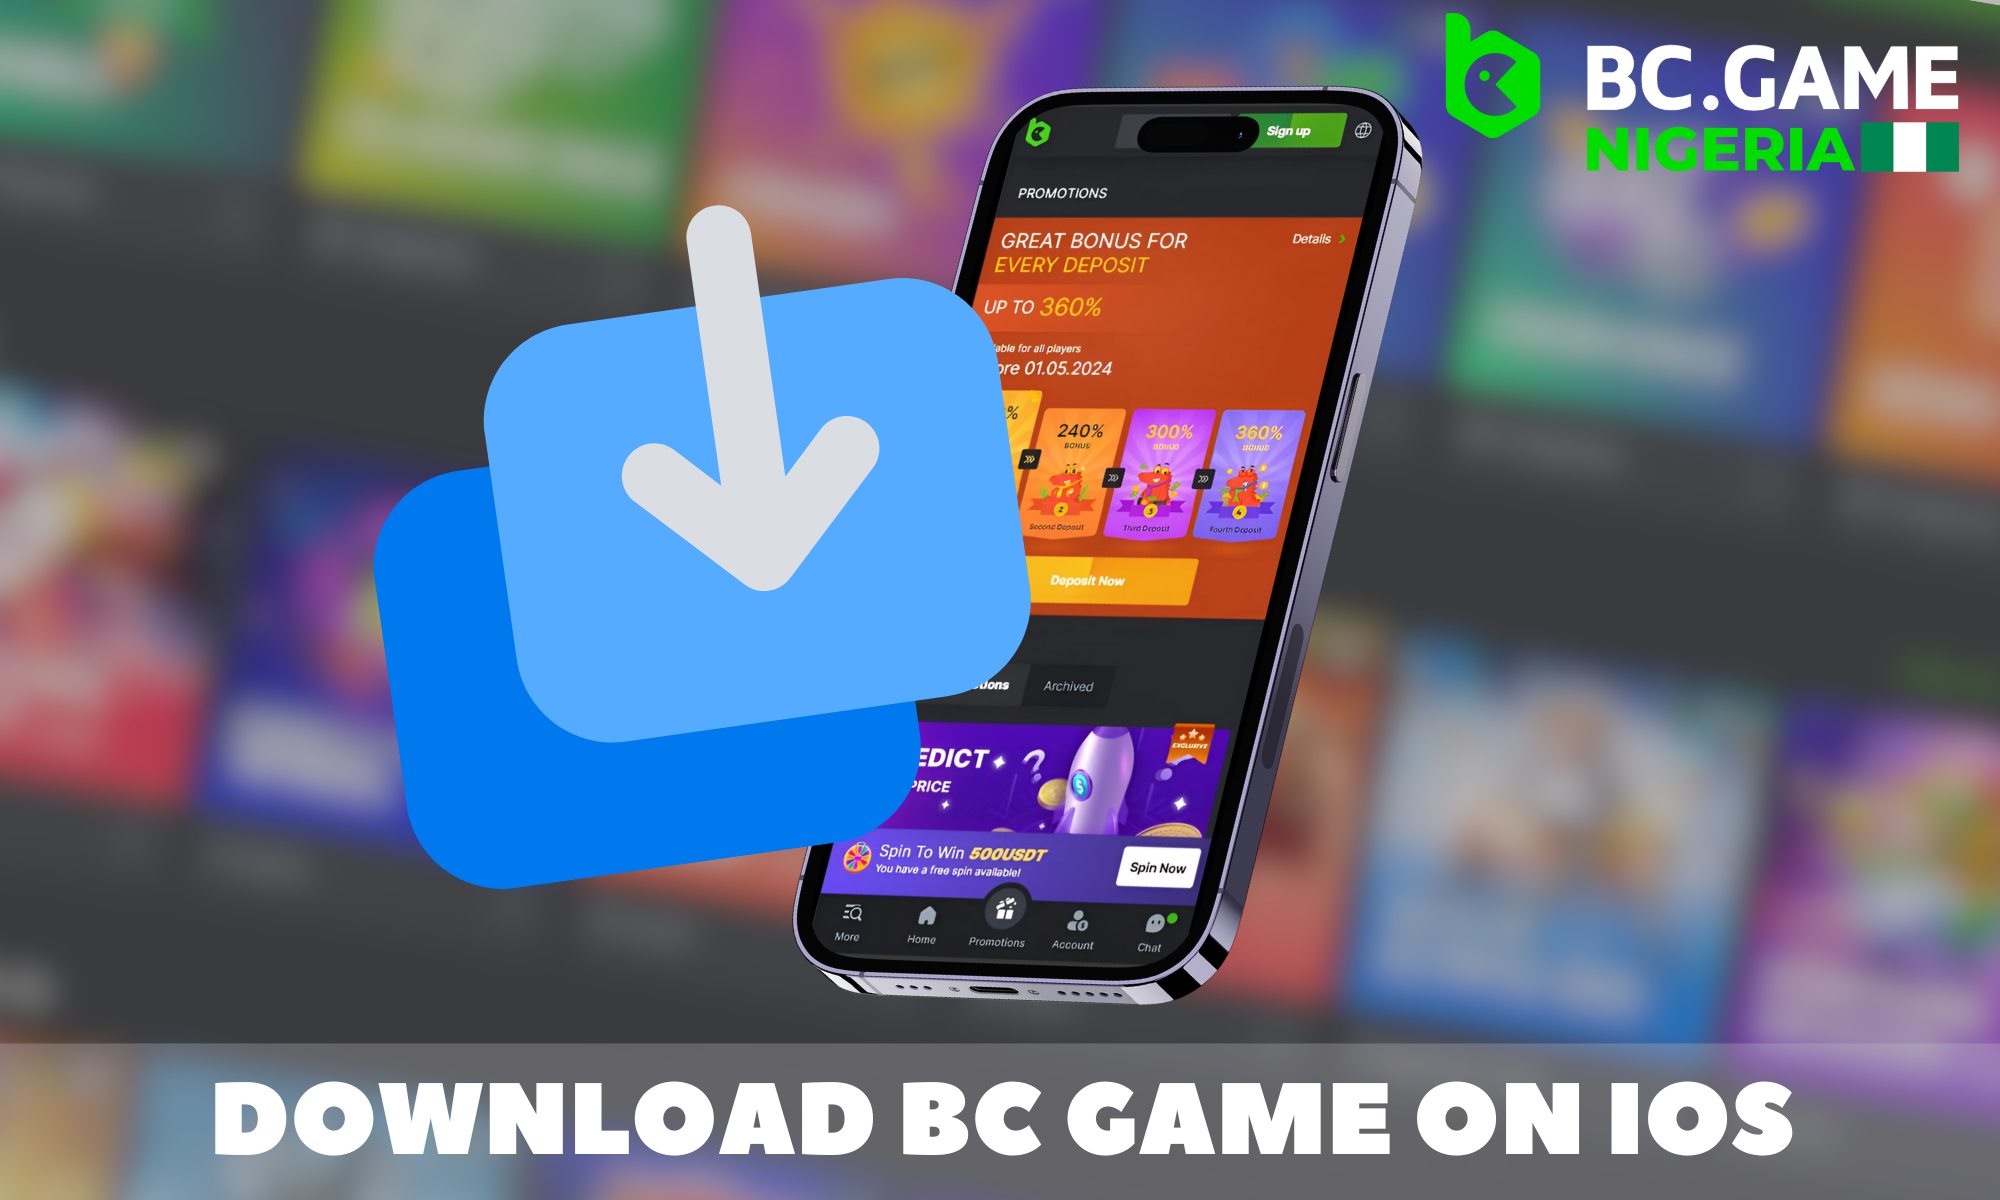 Step-by-step instructions for downloading the BC Game app on IOS